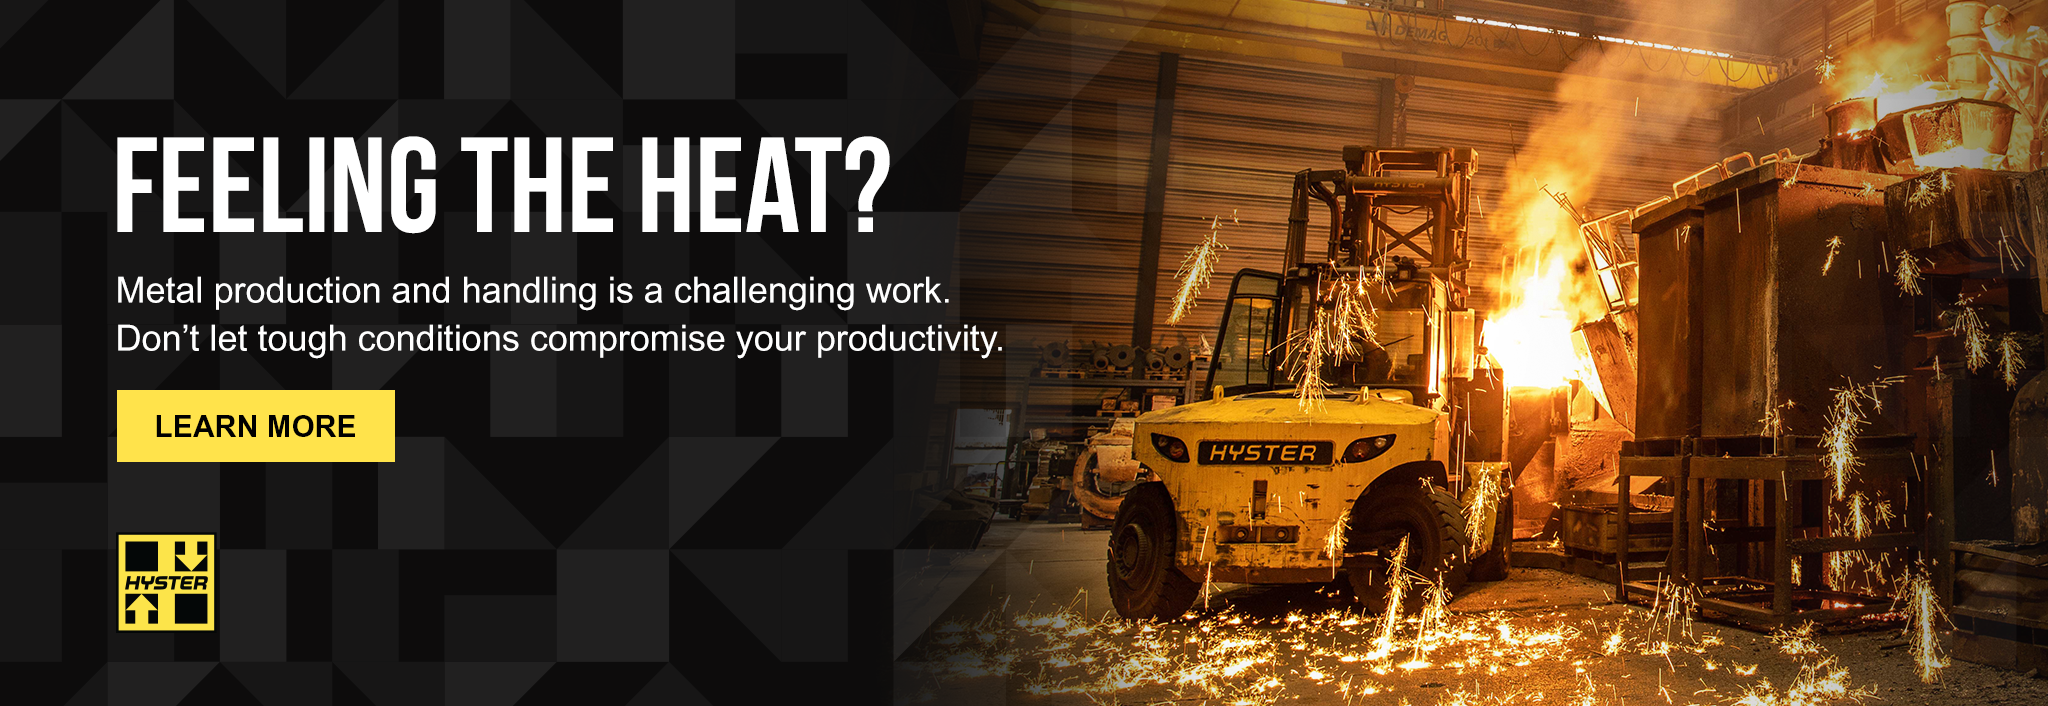 Hyster Solutions for the Metals Industry Promo Banner